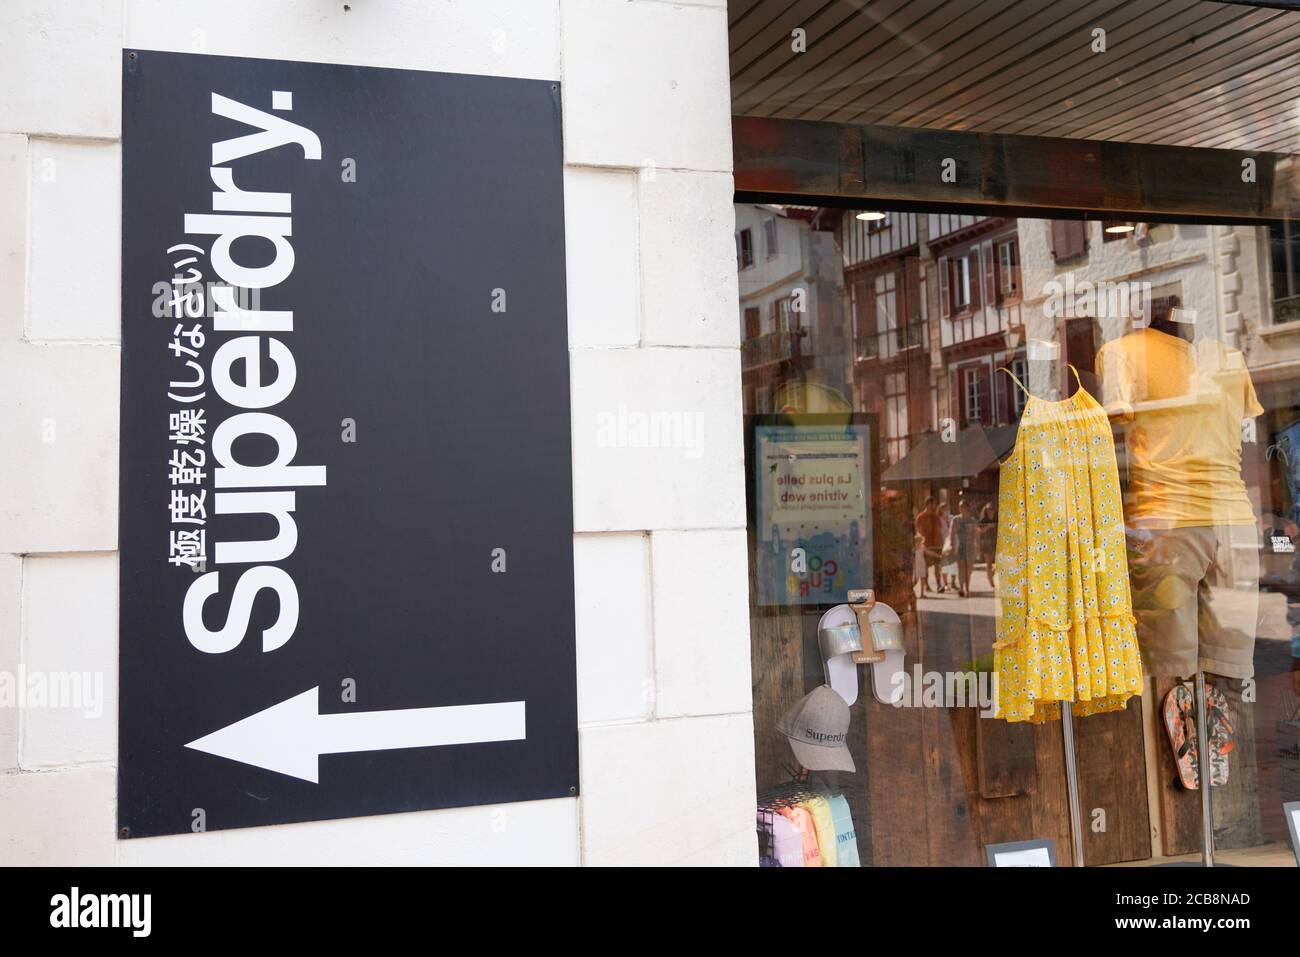 Bordeaux , Aquitaine / France - 08 04 2020 : Superdry text and store sign  of british shop branded clothing company Stock Photo - Alamy